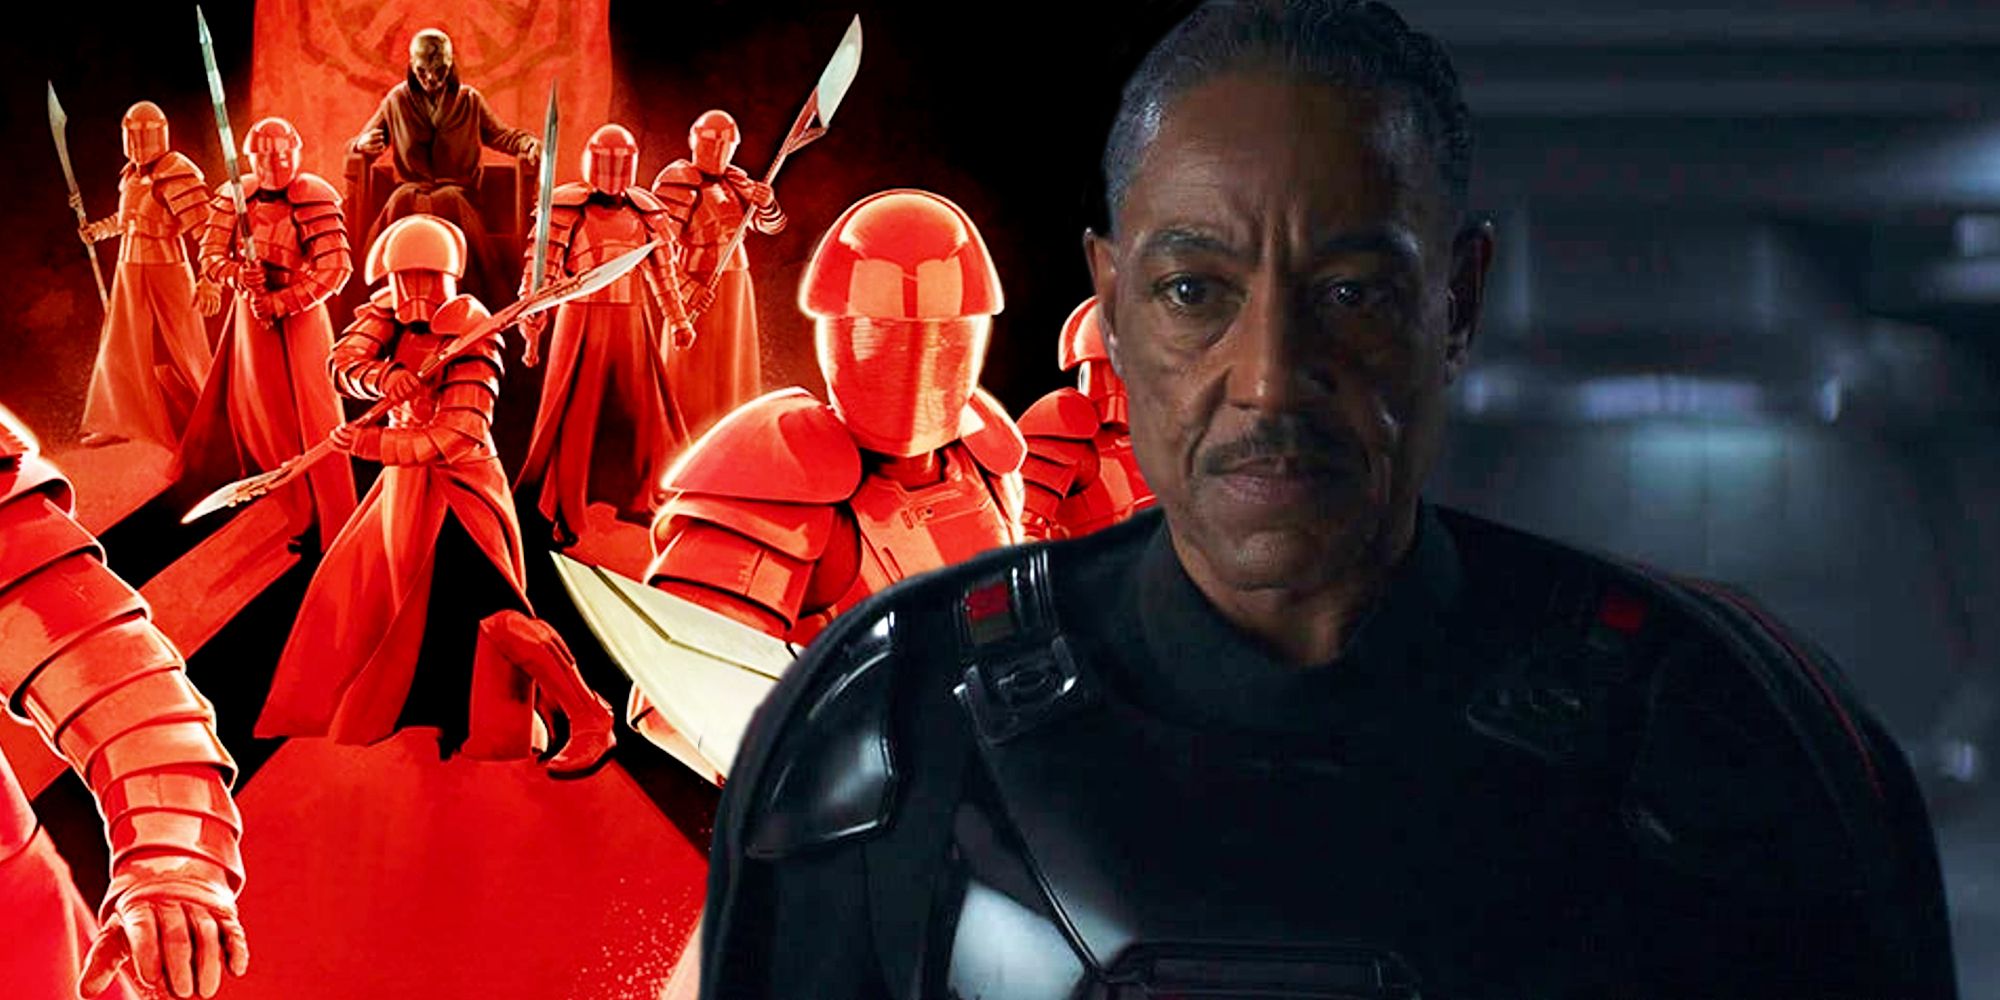 The Praetorian Guards shown protecting Snoke and Moff Gideon from The Mandalorian.